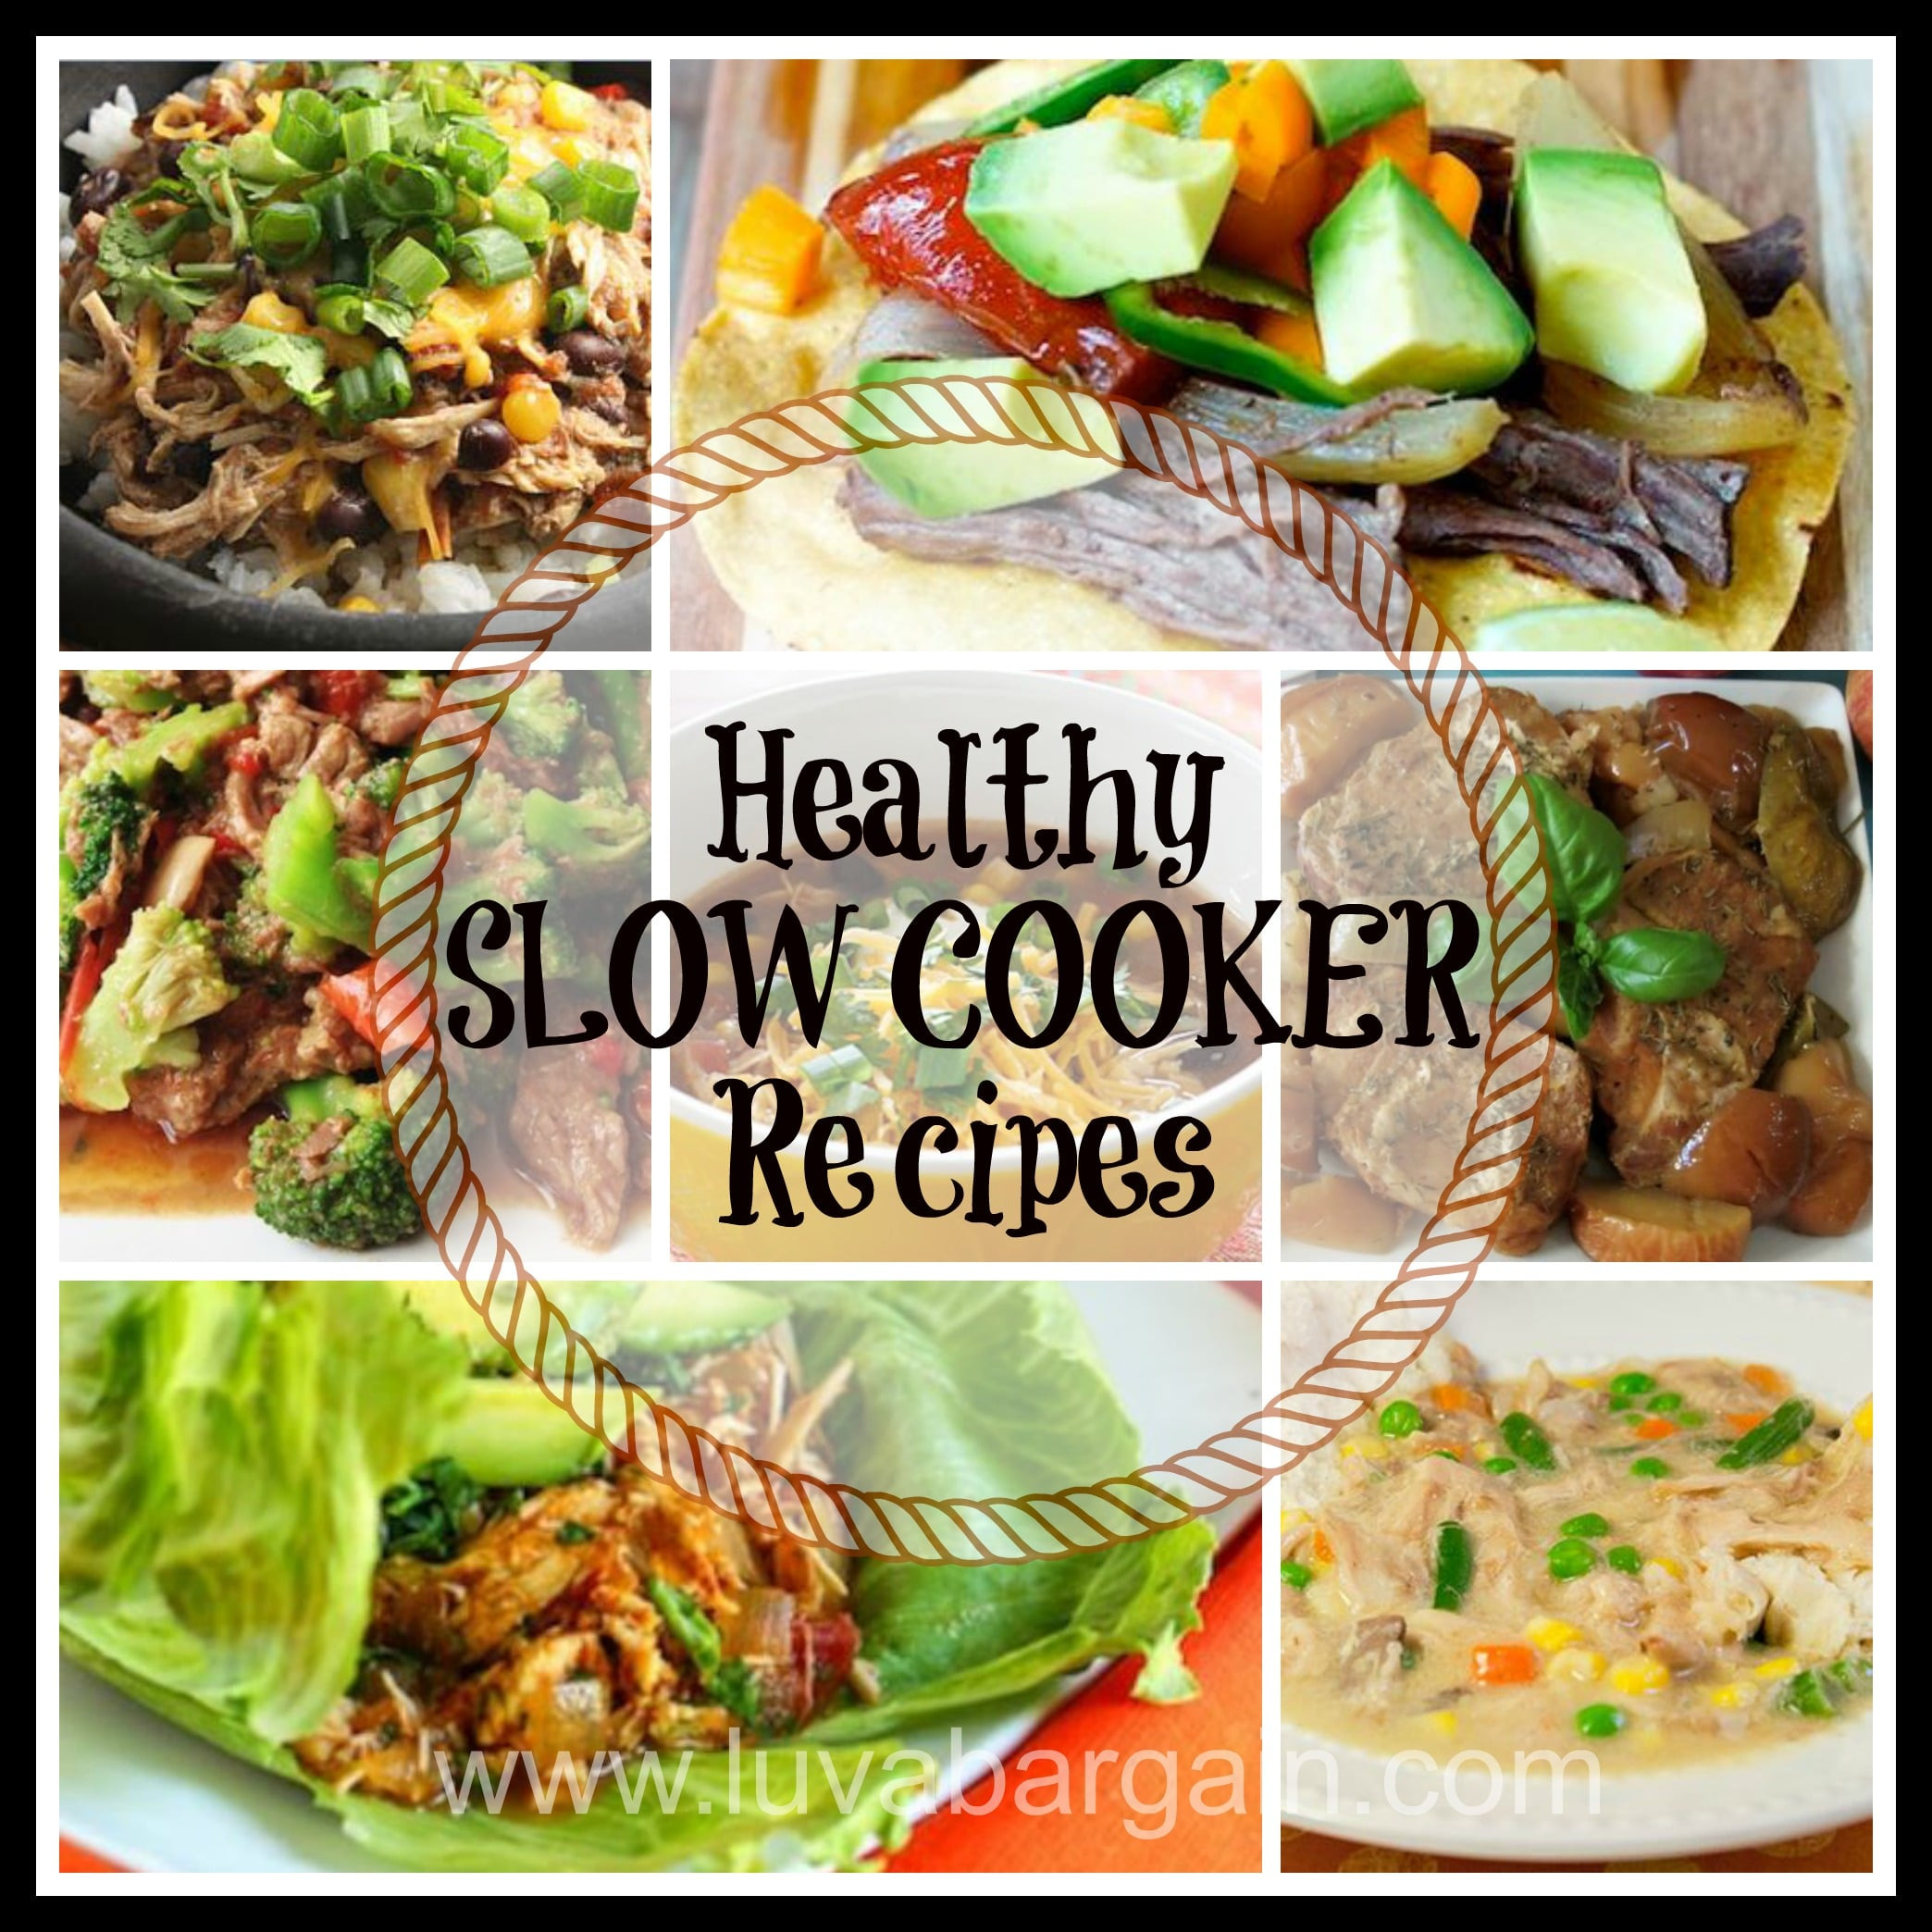 Healthy Slow Cooker Recipes
 Healthy Slow Cooker Recipes